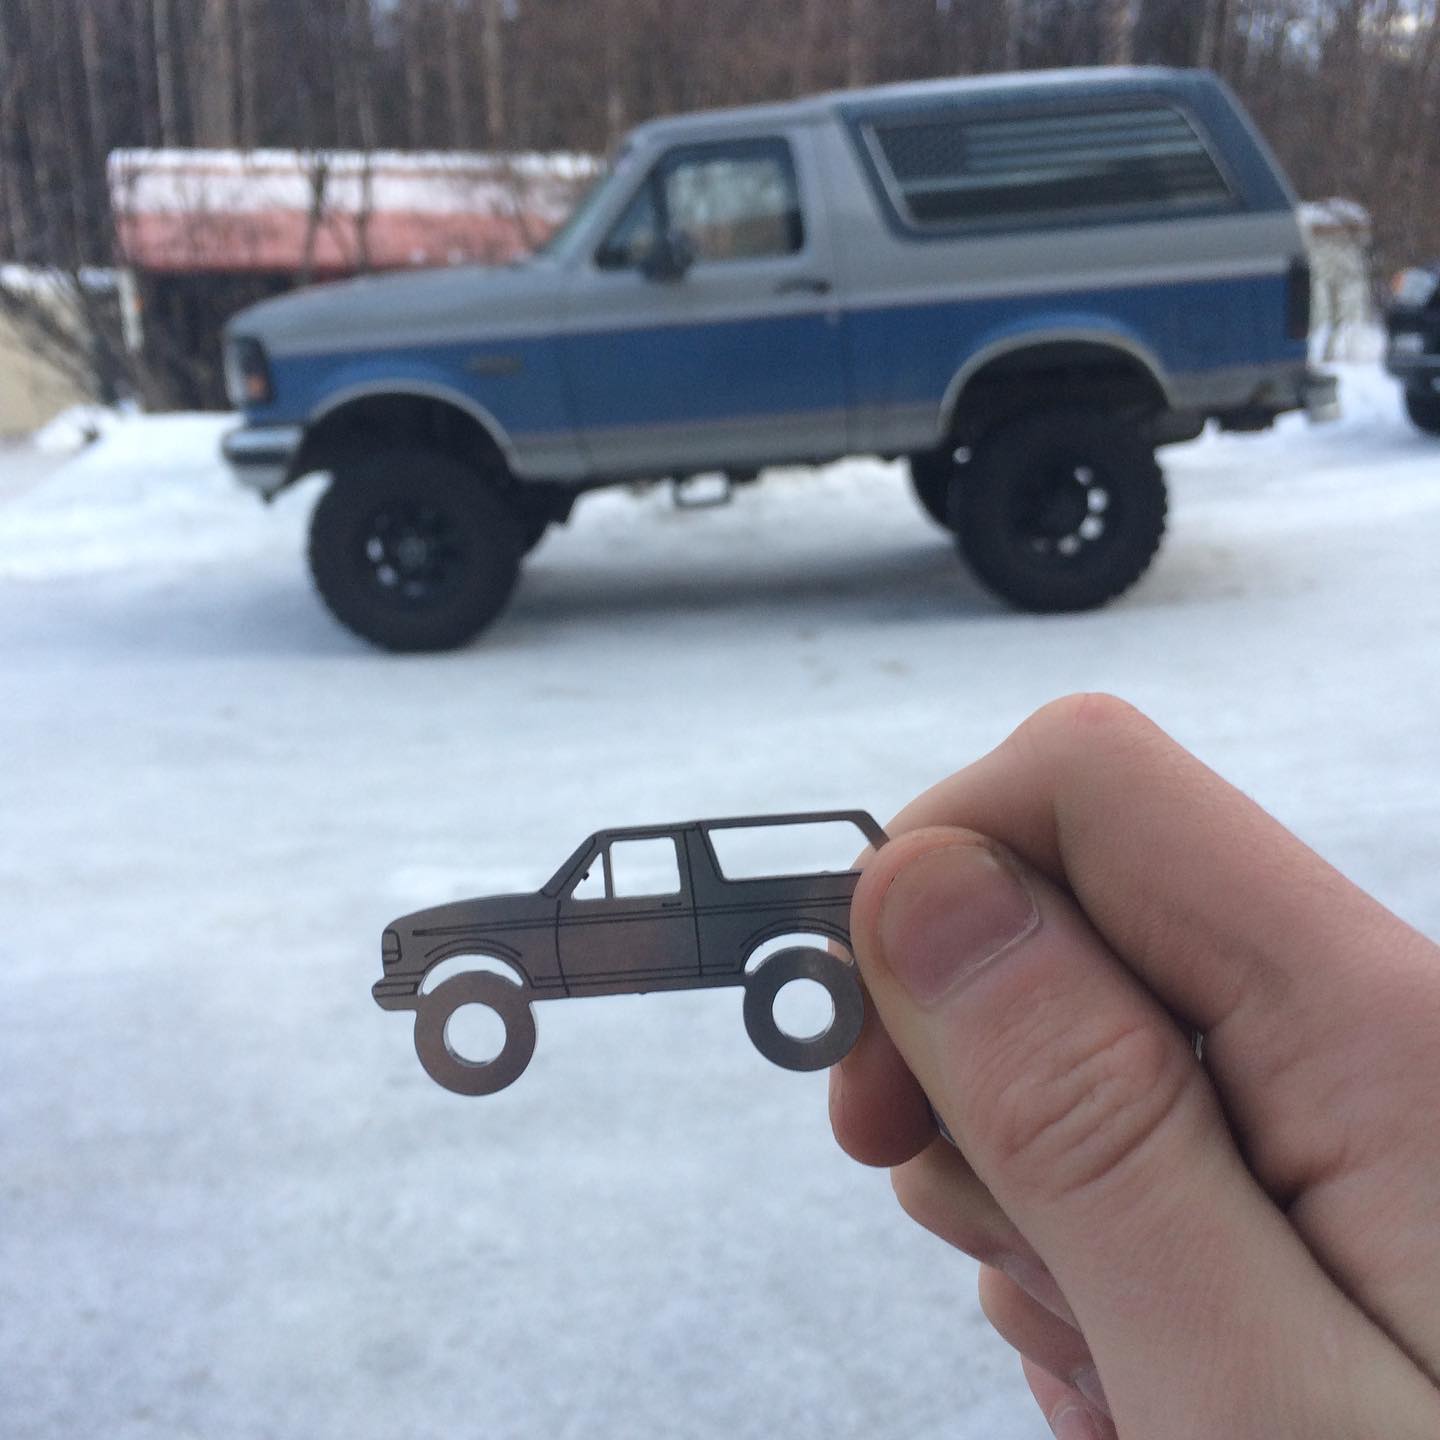 obs ford keychain